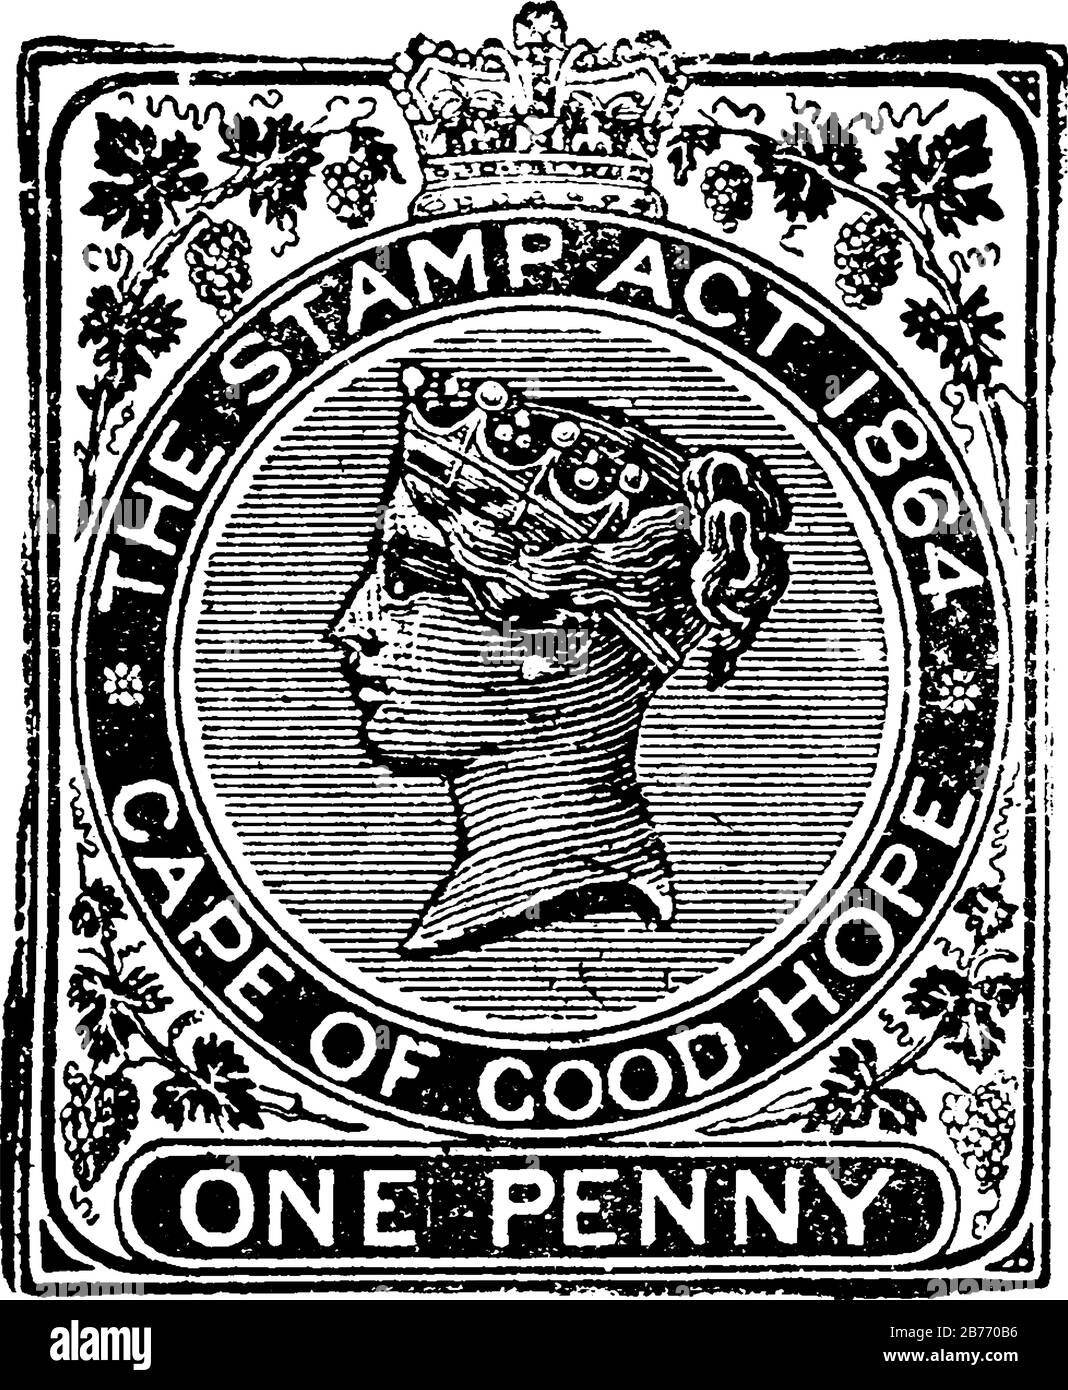 Cape of Good Hope Revenue Stamp (1 penny) from 1883, a adhesive piece of paper was stuck to something to show an amount of money paid, vintage line dr Stock Vector